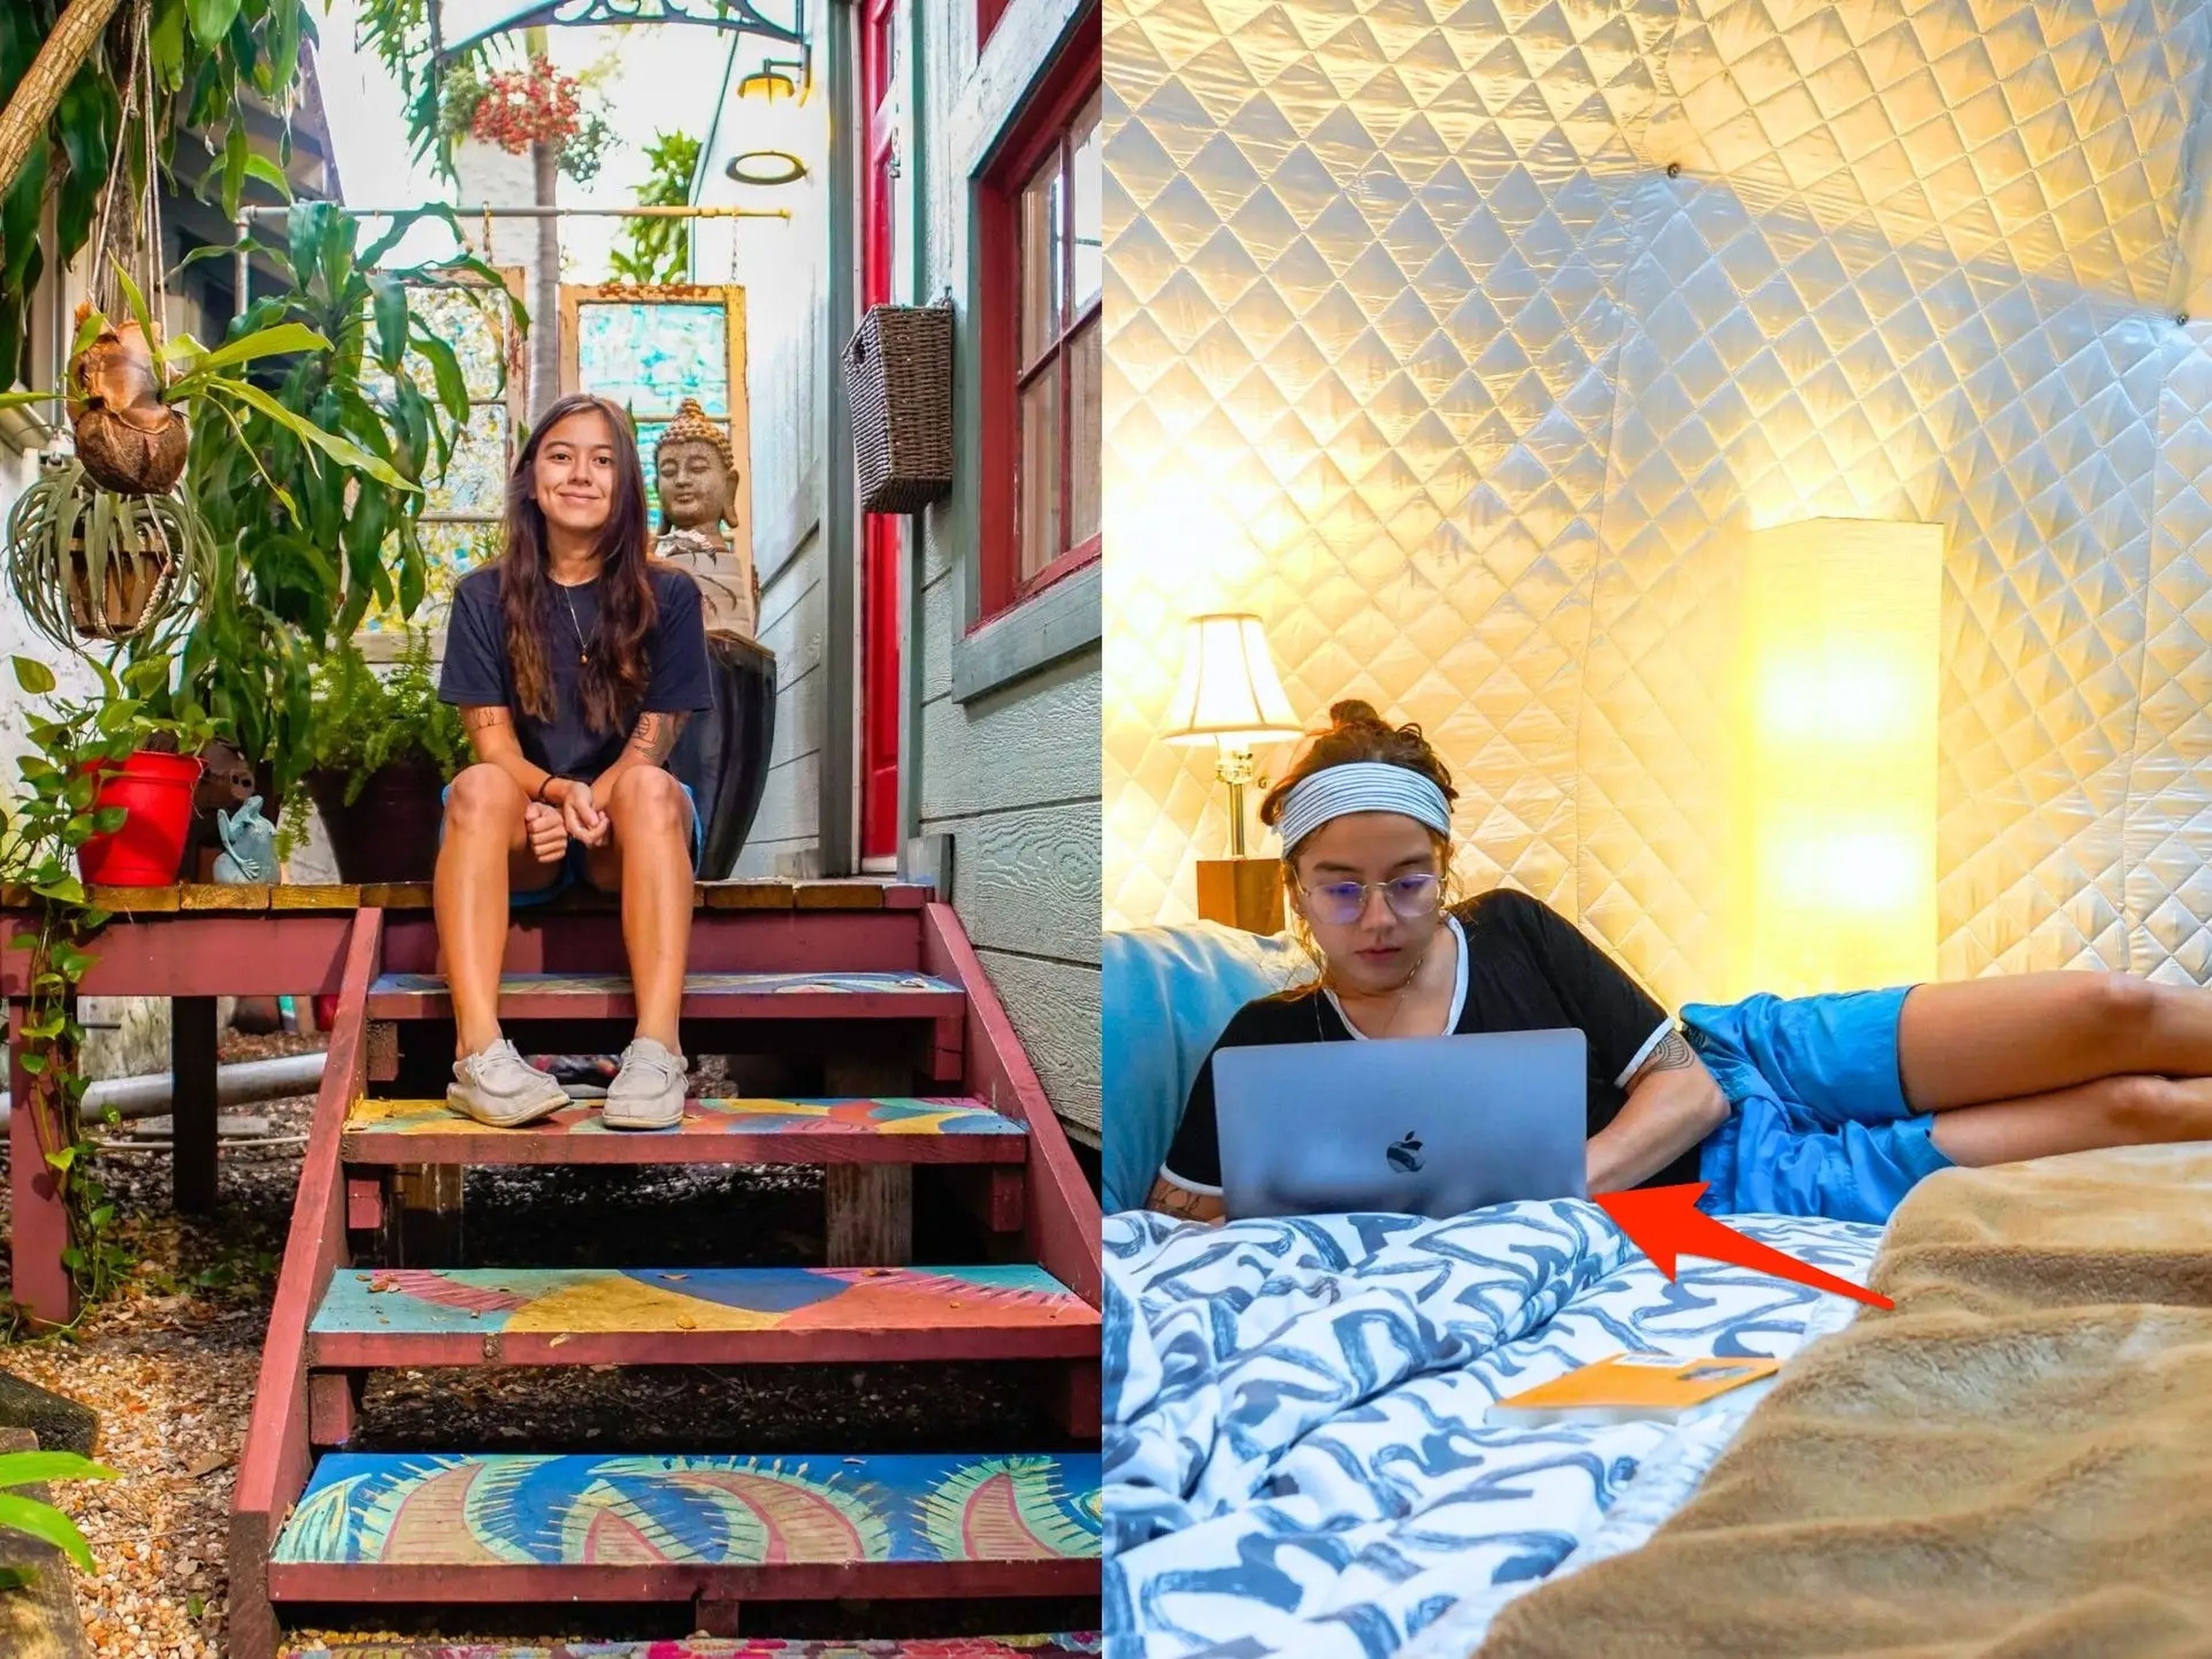 Left: The author sits on a colorful porch with a tiny home on the right and lush greenery on the left. Right: The author lays on a bed with her laptop inside a white dome with two lamps behind her. There's a red arrow pointing to her laptop r